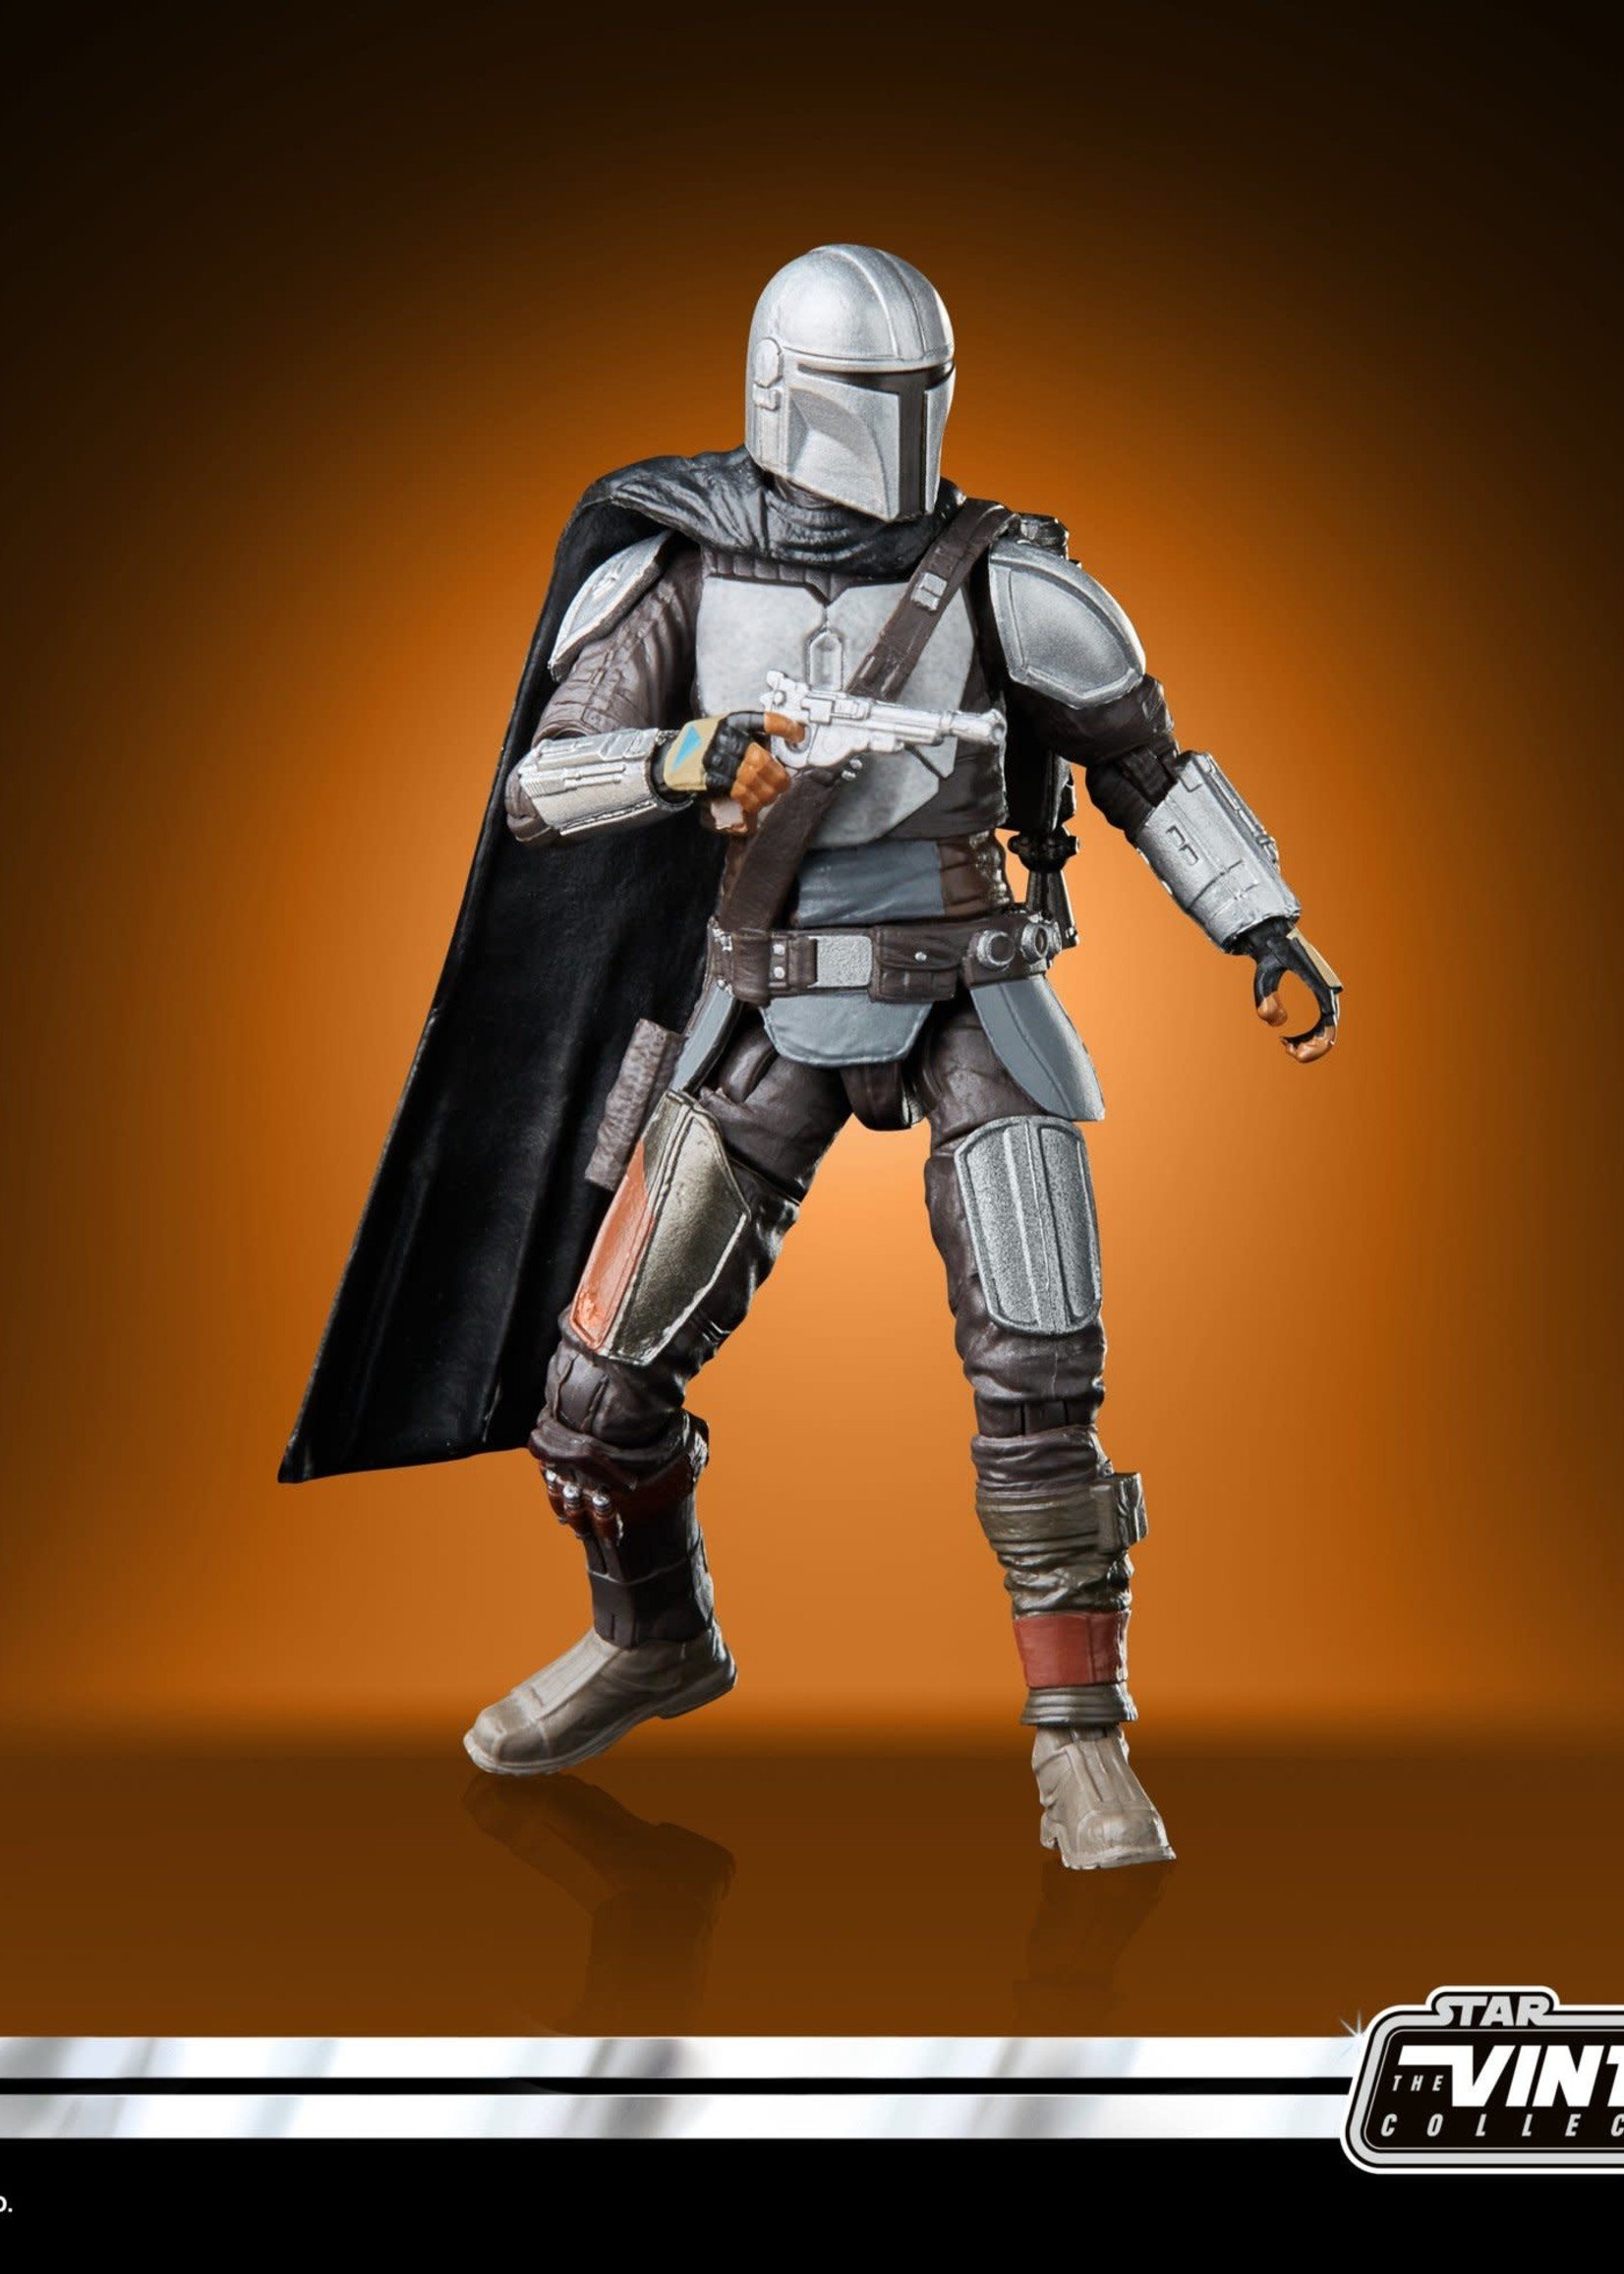 Star Wars Star Wars The Vintage Collection: The Mandalorian Action Figure